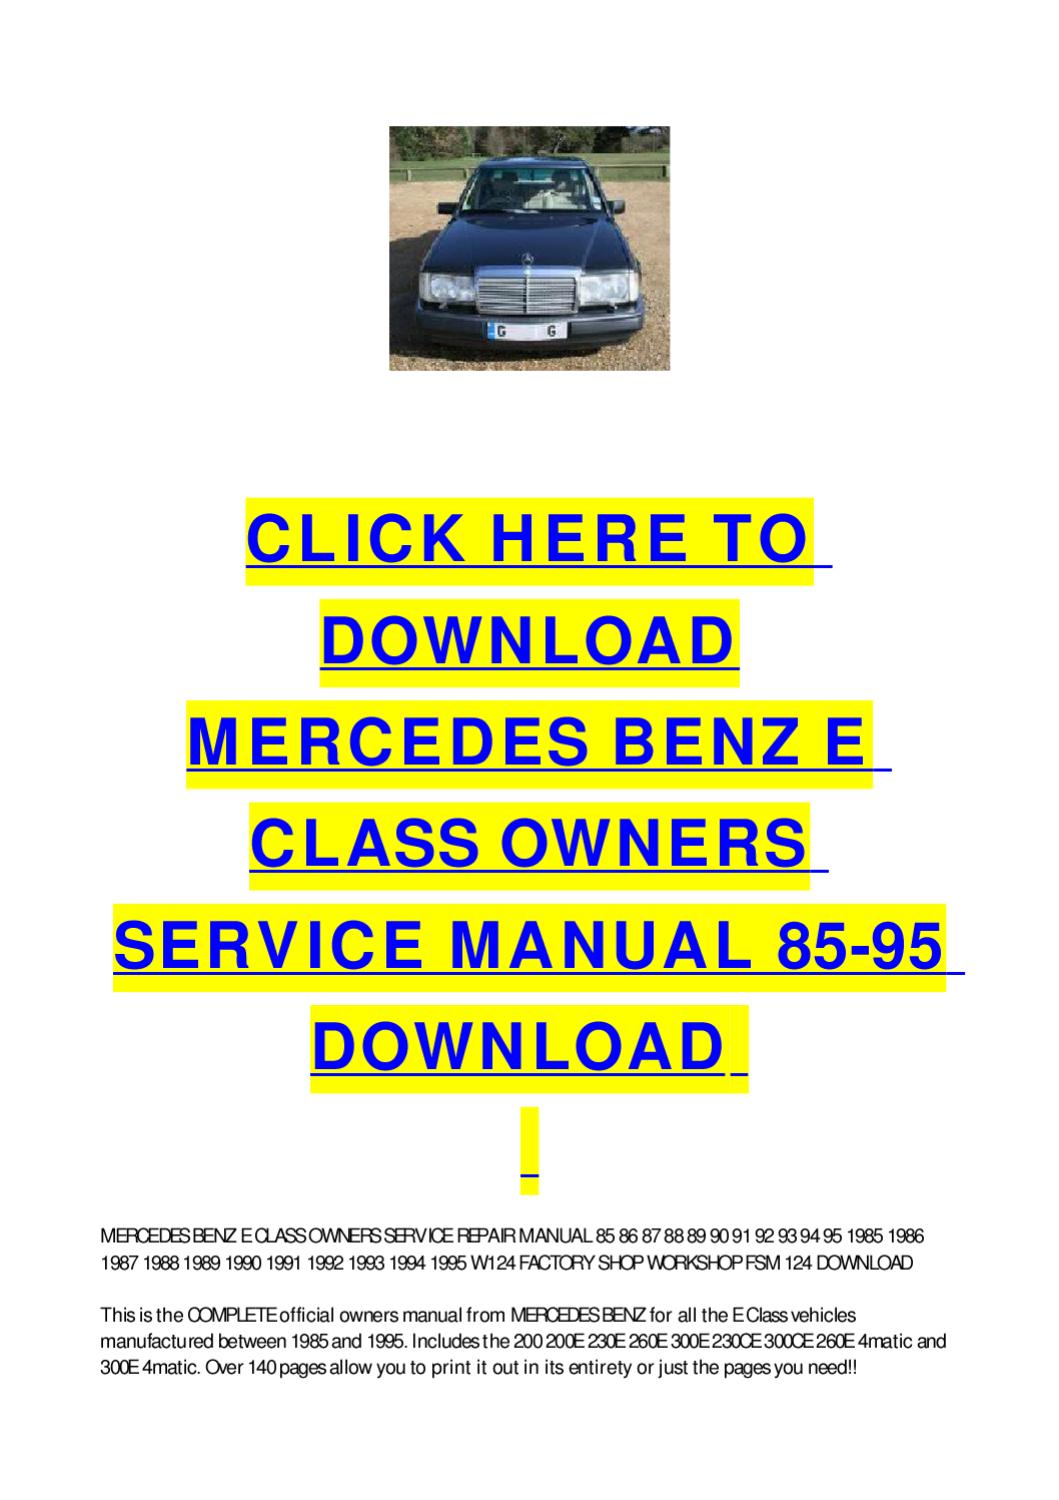 1995 Mercedes Benz Owners Manual Download